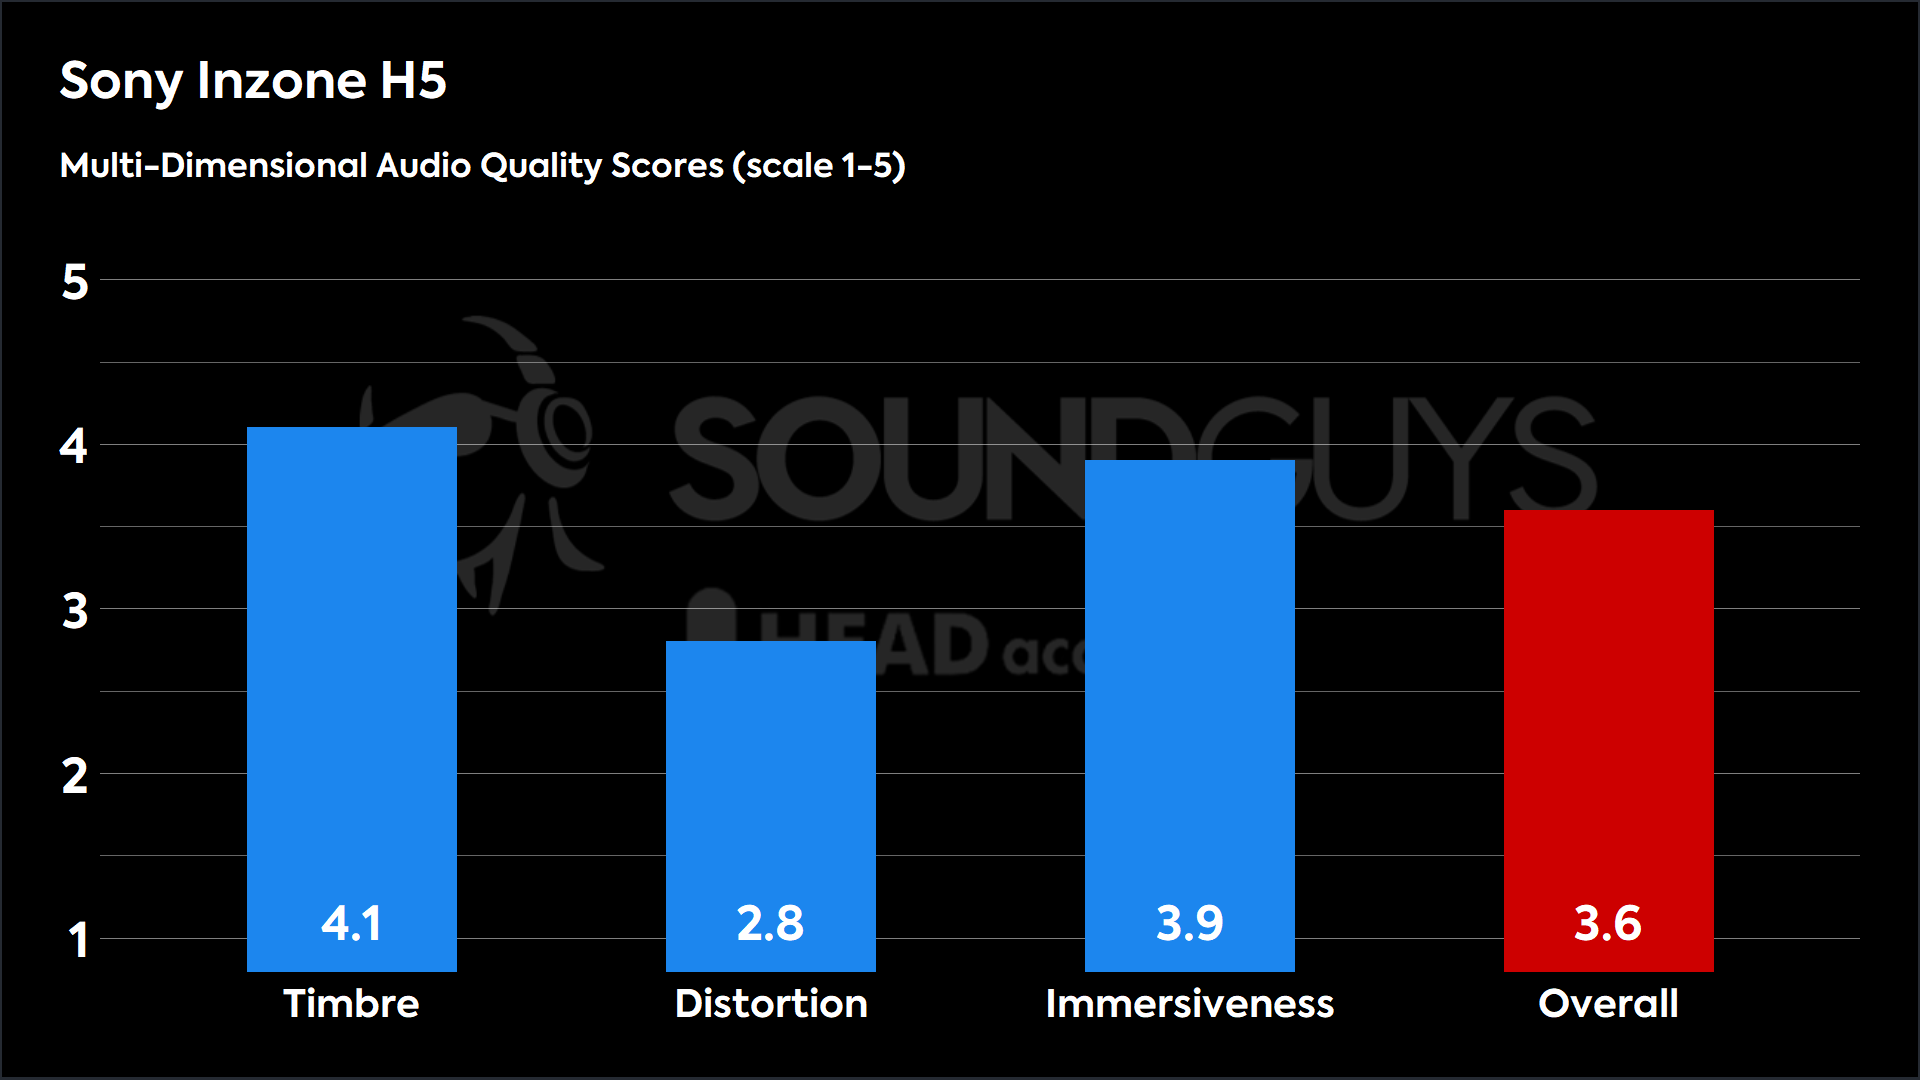 This chart shows the MDAQS results for the Sony Inzone H5 in Default mode. The Timbre score is 4.1, The Distortion score is 2.8, the Immersiveness score is 3.9, and the Overall Score is 3.6).